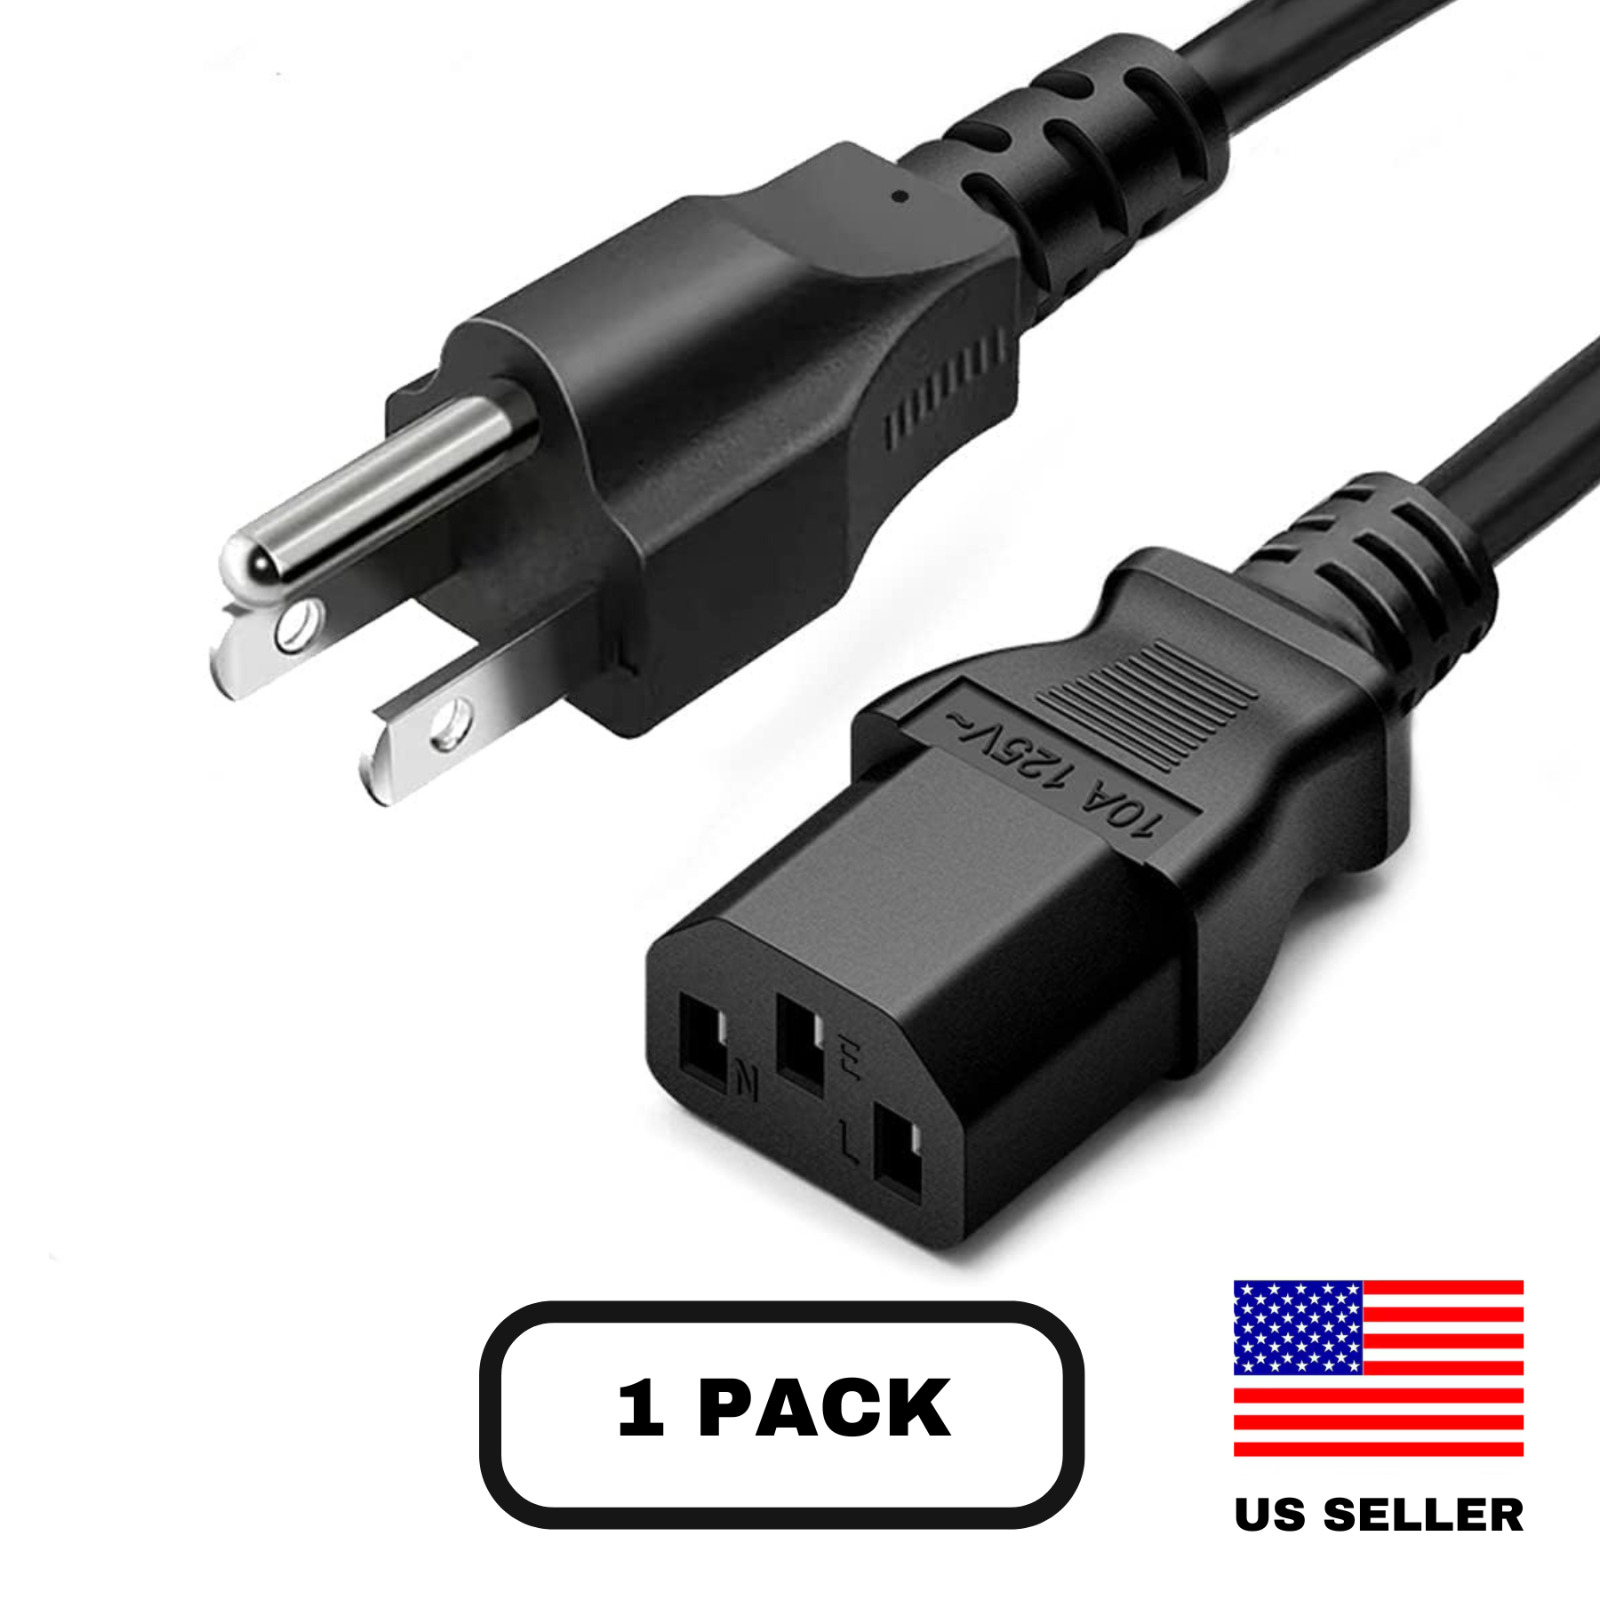 Lot 1-100 AC 3 Prong Universal Power Cord Short 3FT Cable For Desktop PC Xbox HP